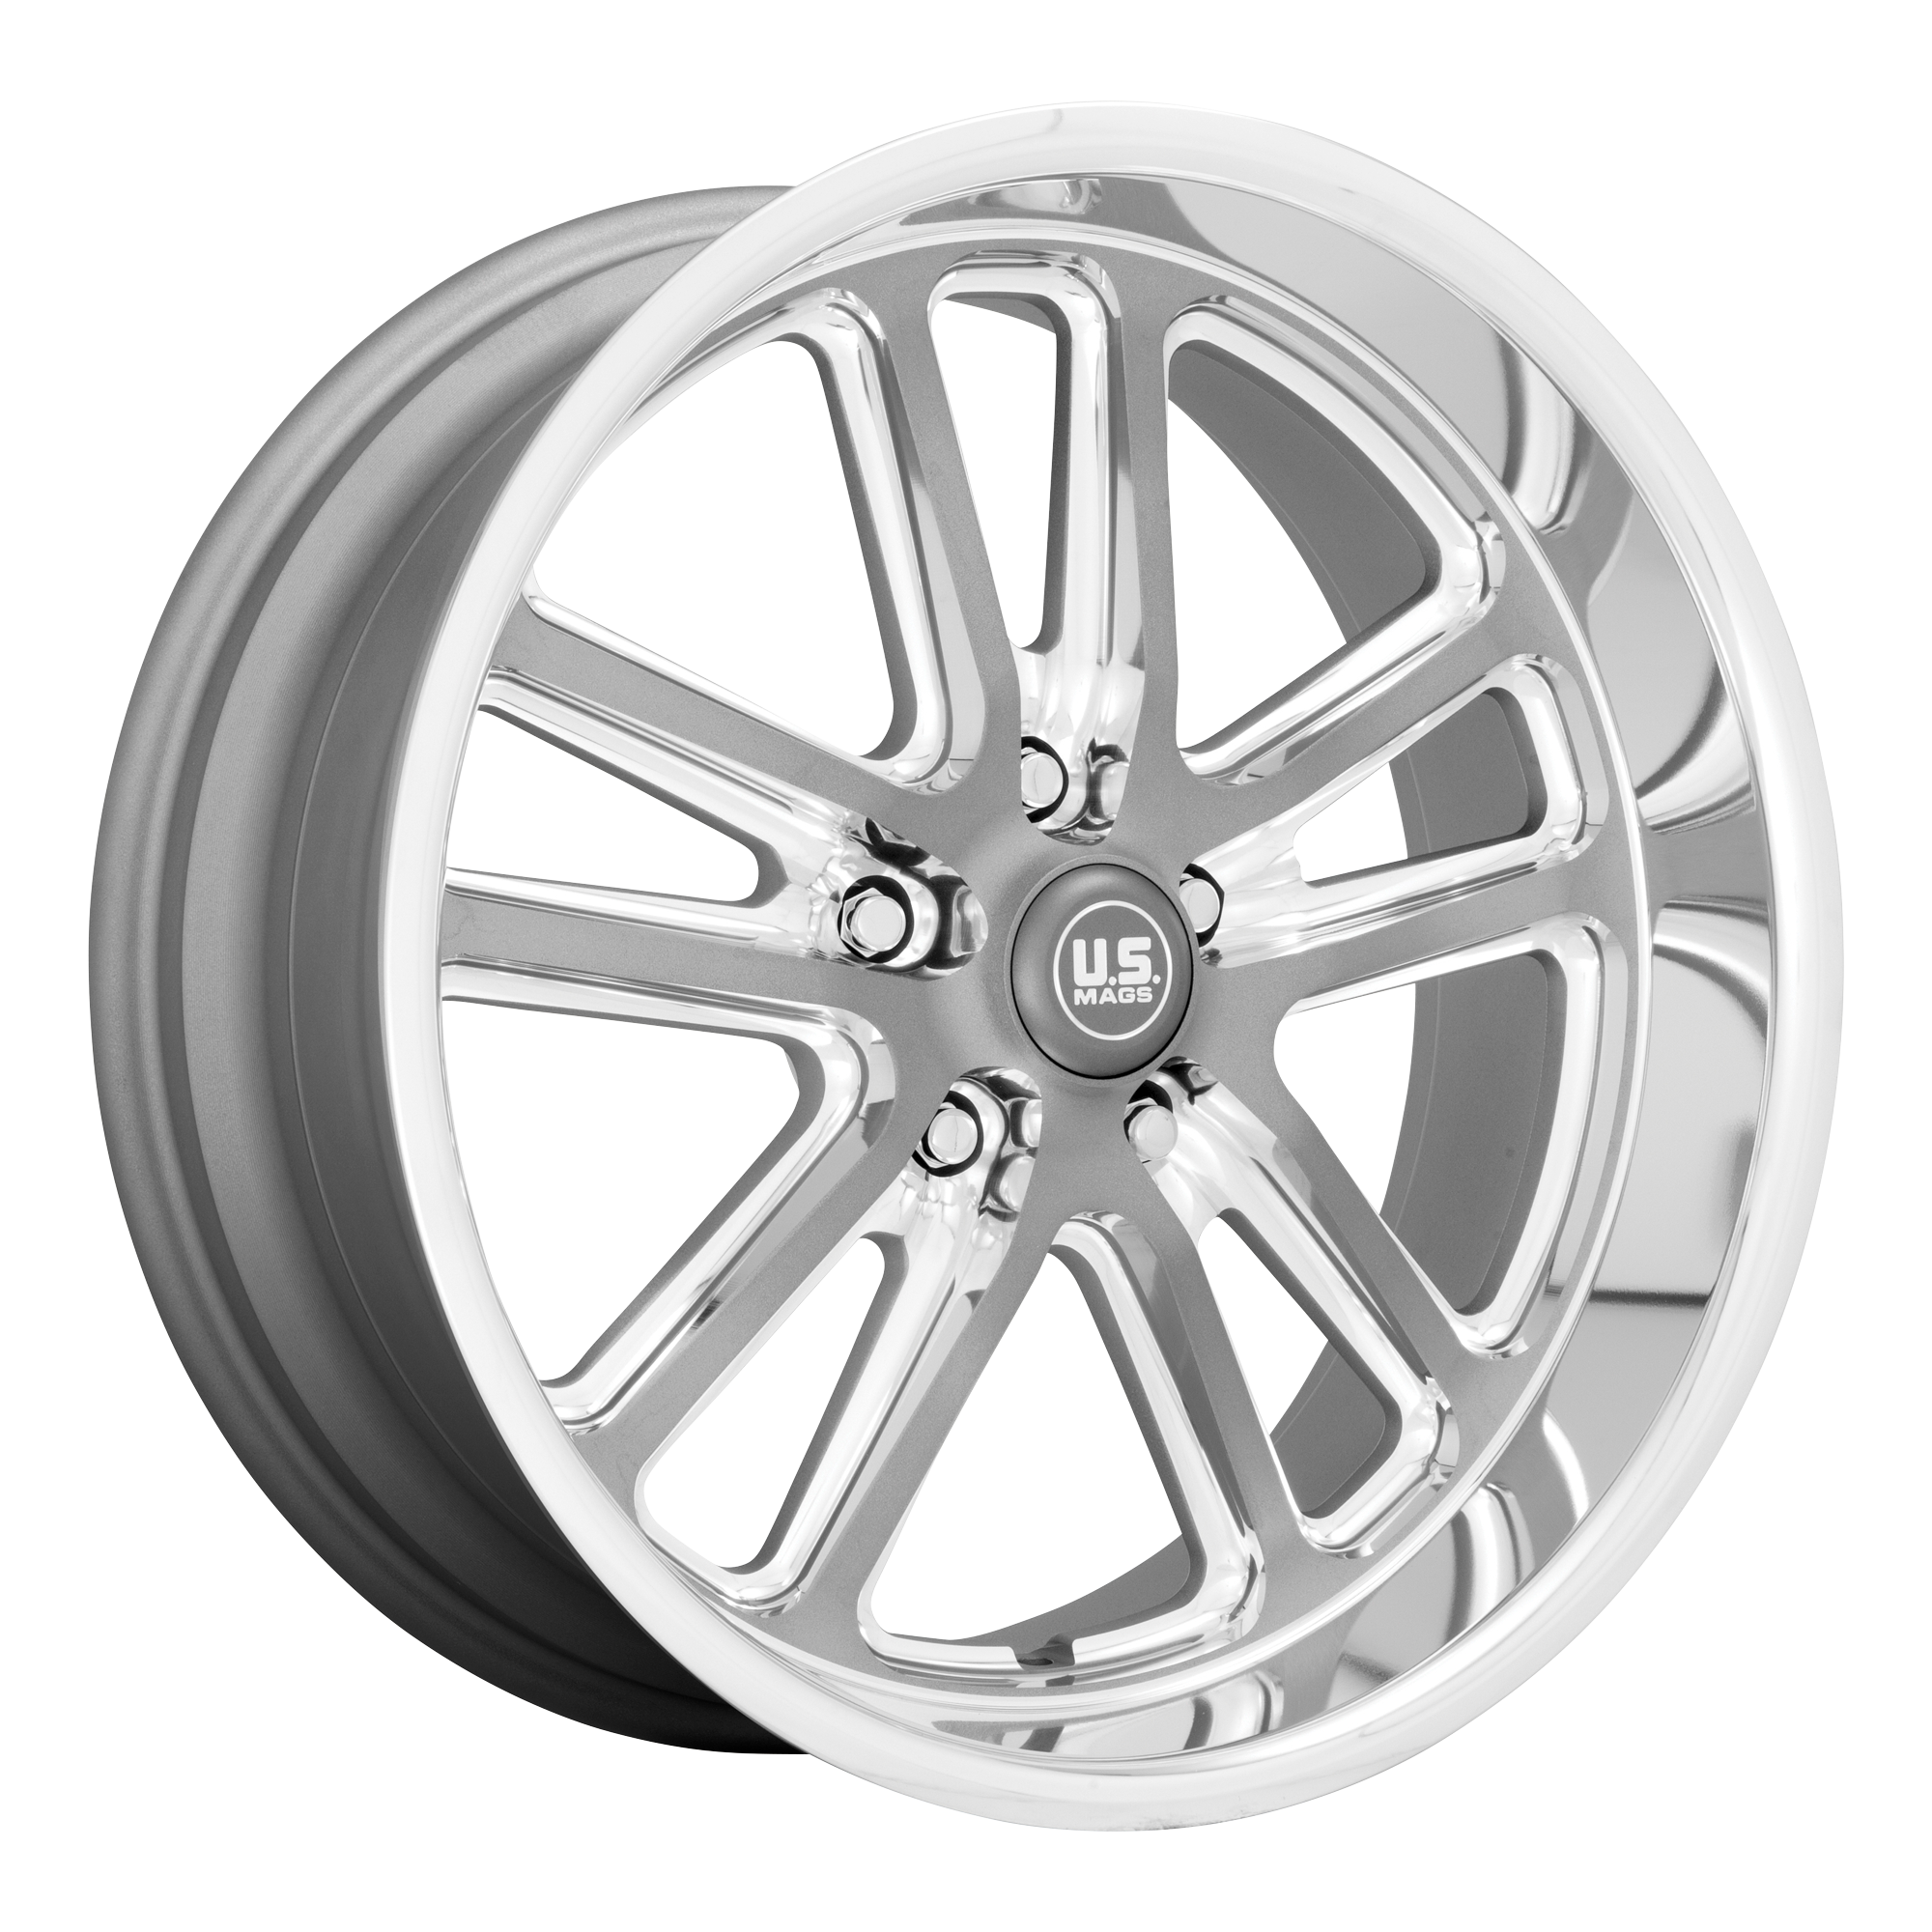 BULLET 20x8 5x127.00 TEXTURED GUN METAL W/ MILLED EDGES (1 mm) - Tires and Engine Performance